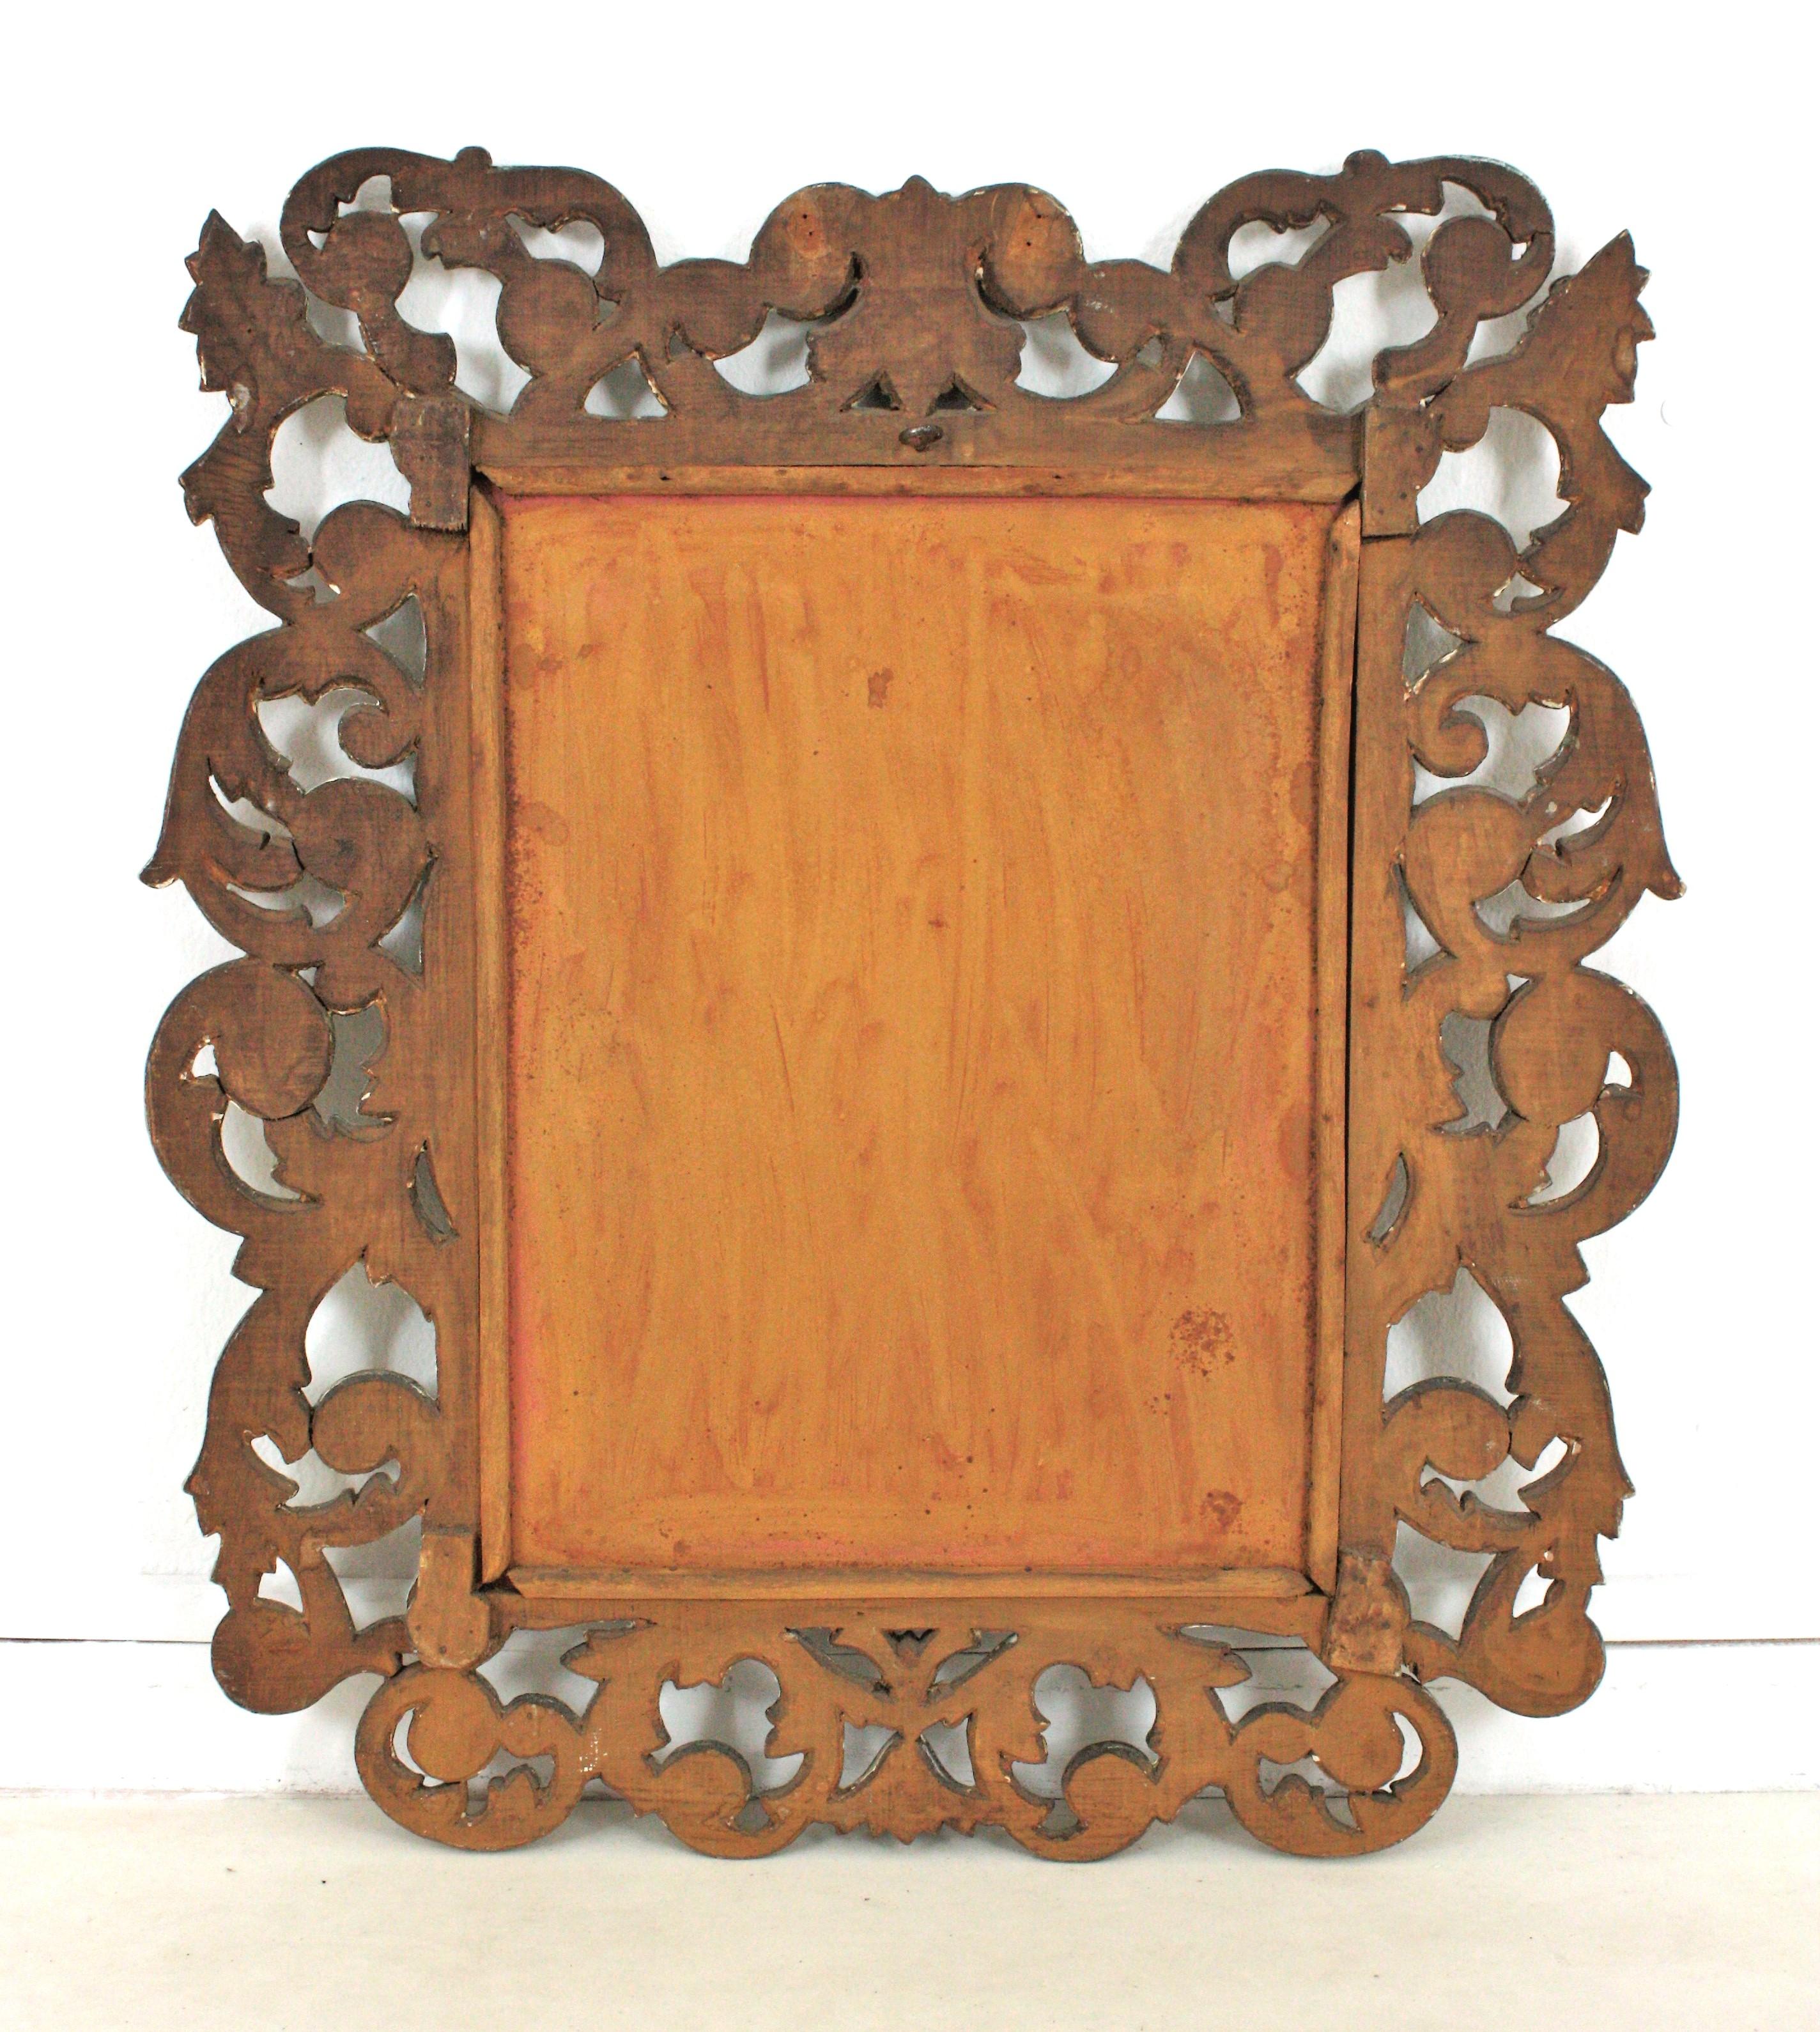 Spanish Foliage Gilt Carved Wood Mirror with Scroll Work Design For Sale 5